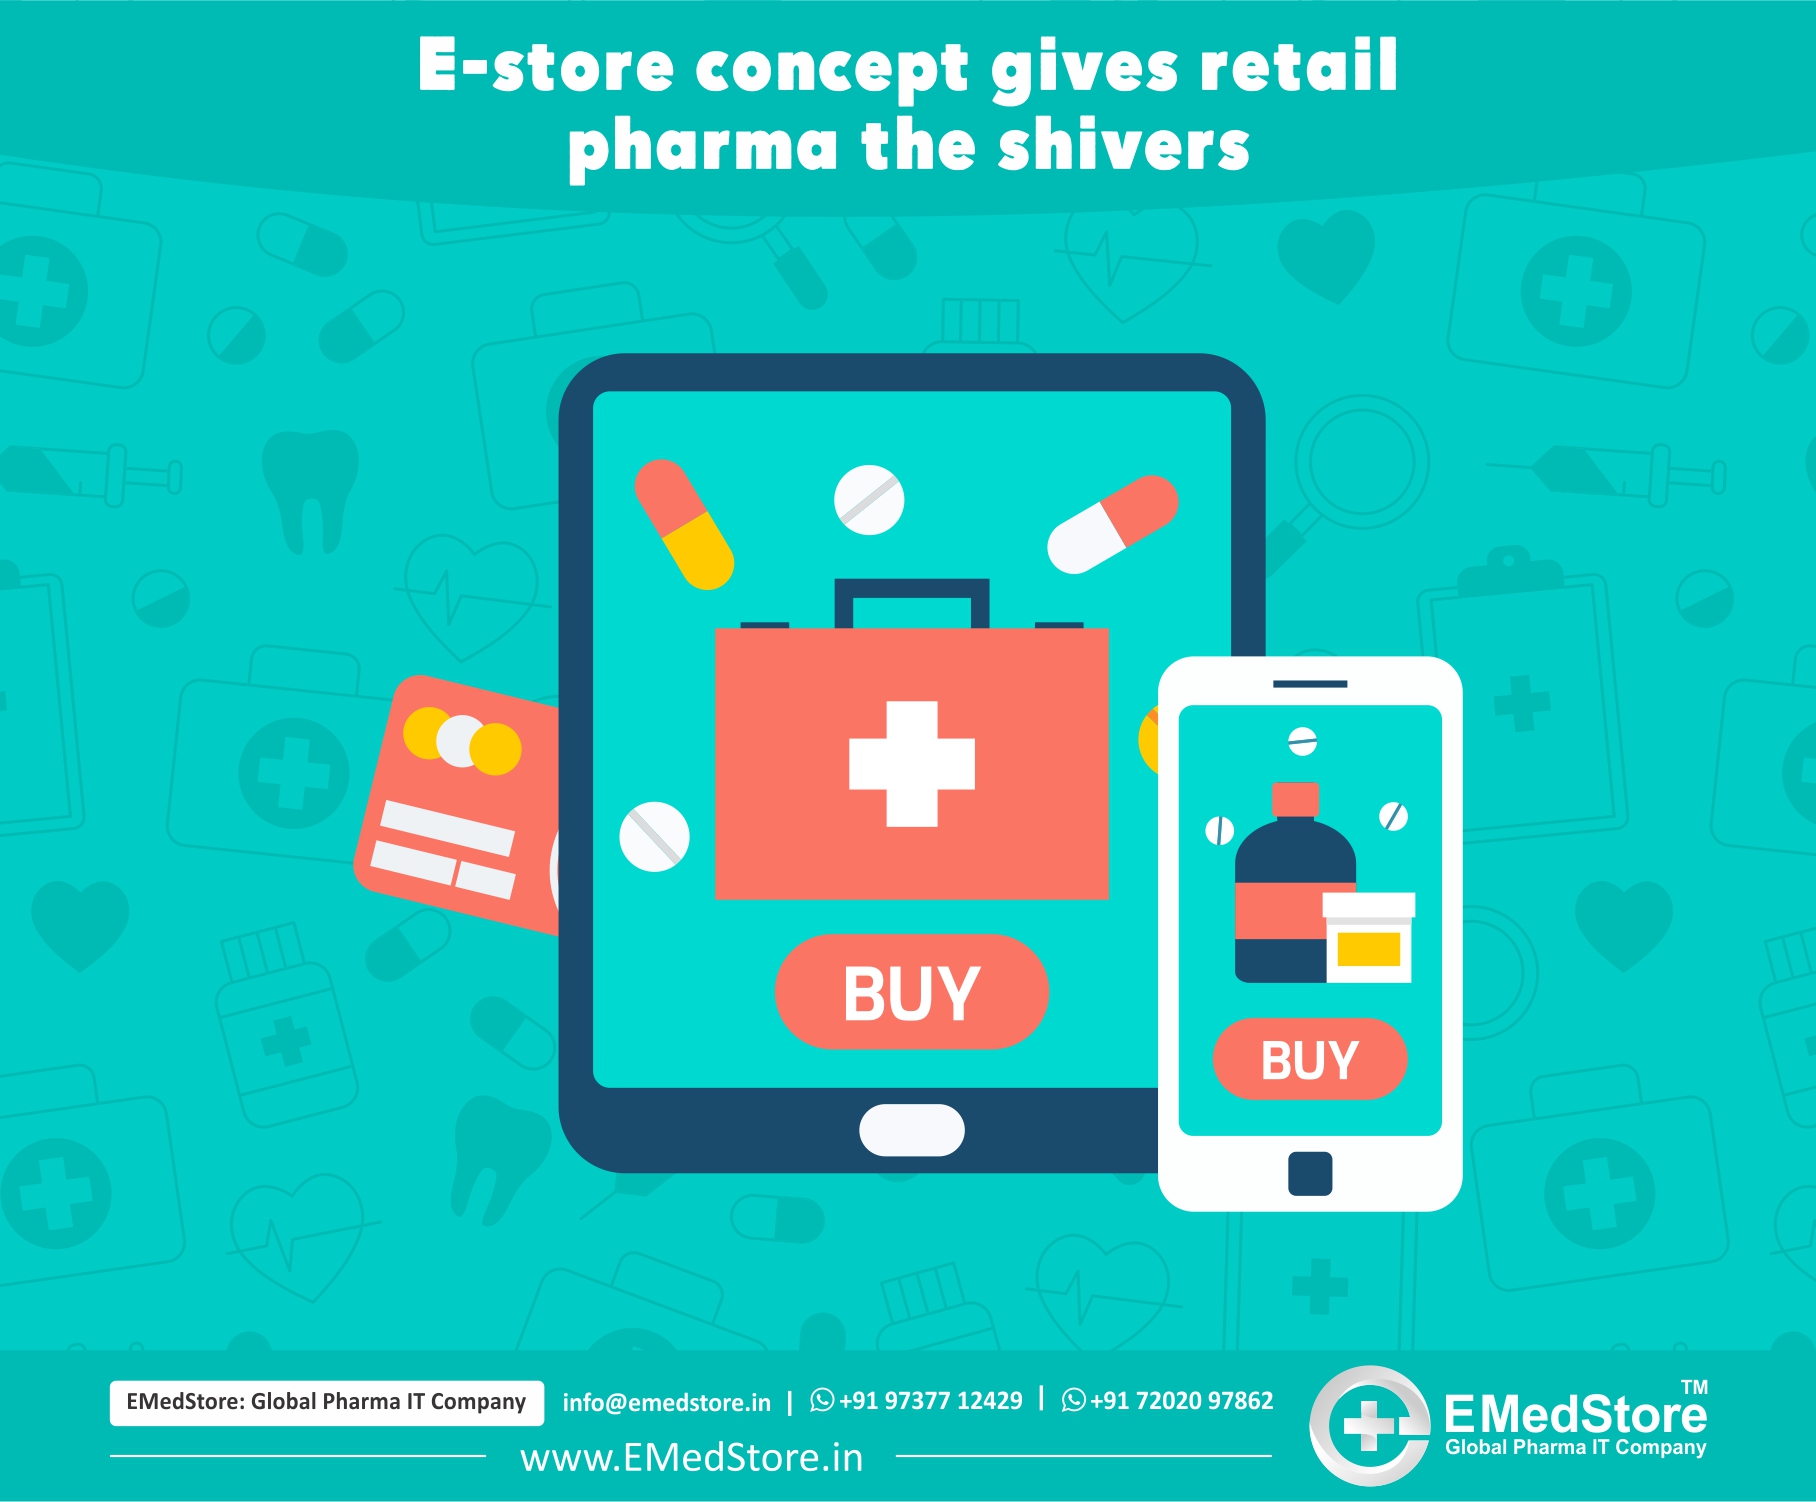 Is there any mobile based application for pharma distributors?